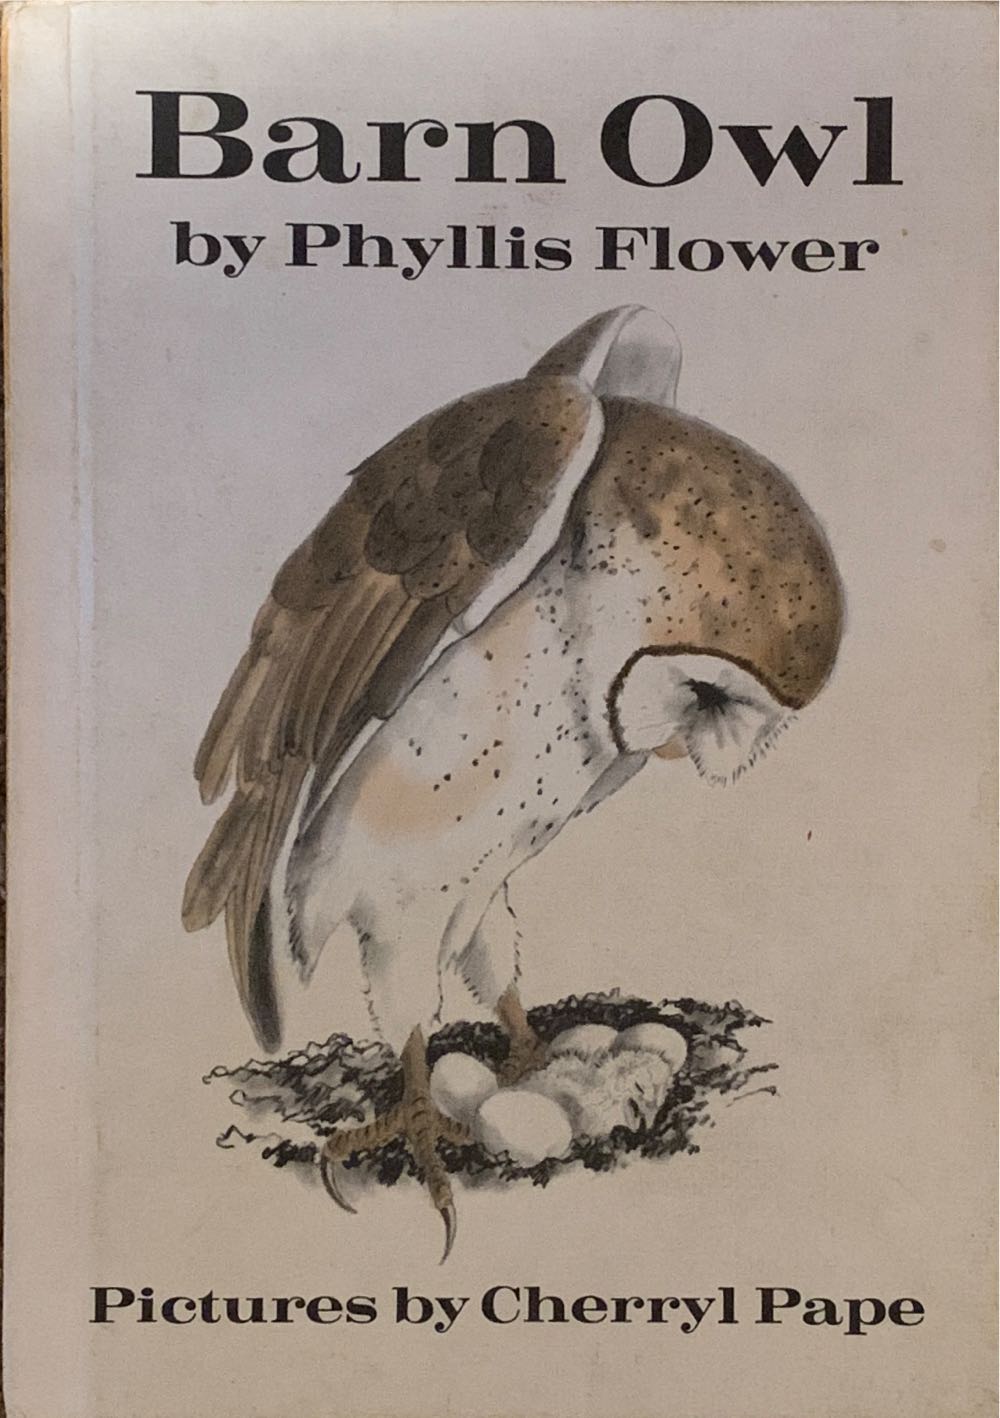 Barn Owl - Phyllis Flower (HarperCollins Publishers) book collectible [Barcode 9780060219215] - Main Image 1